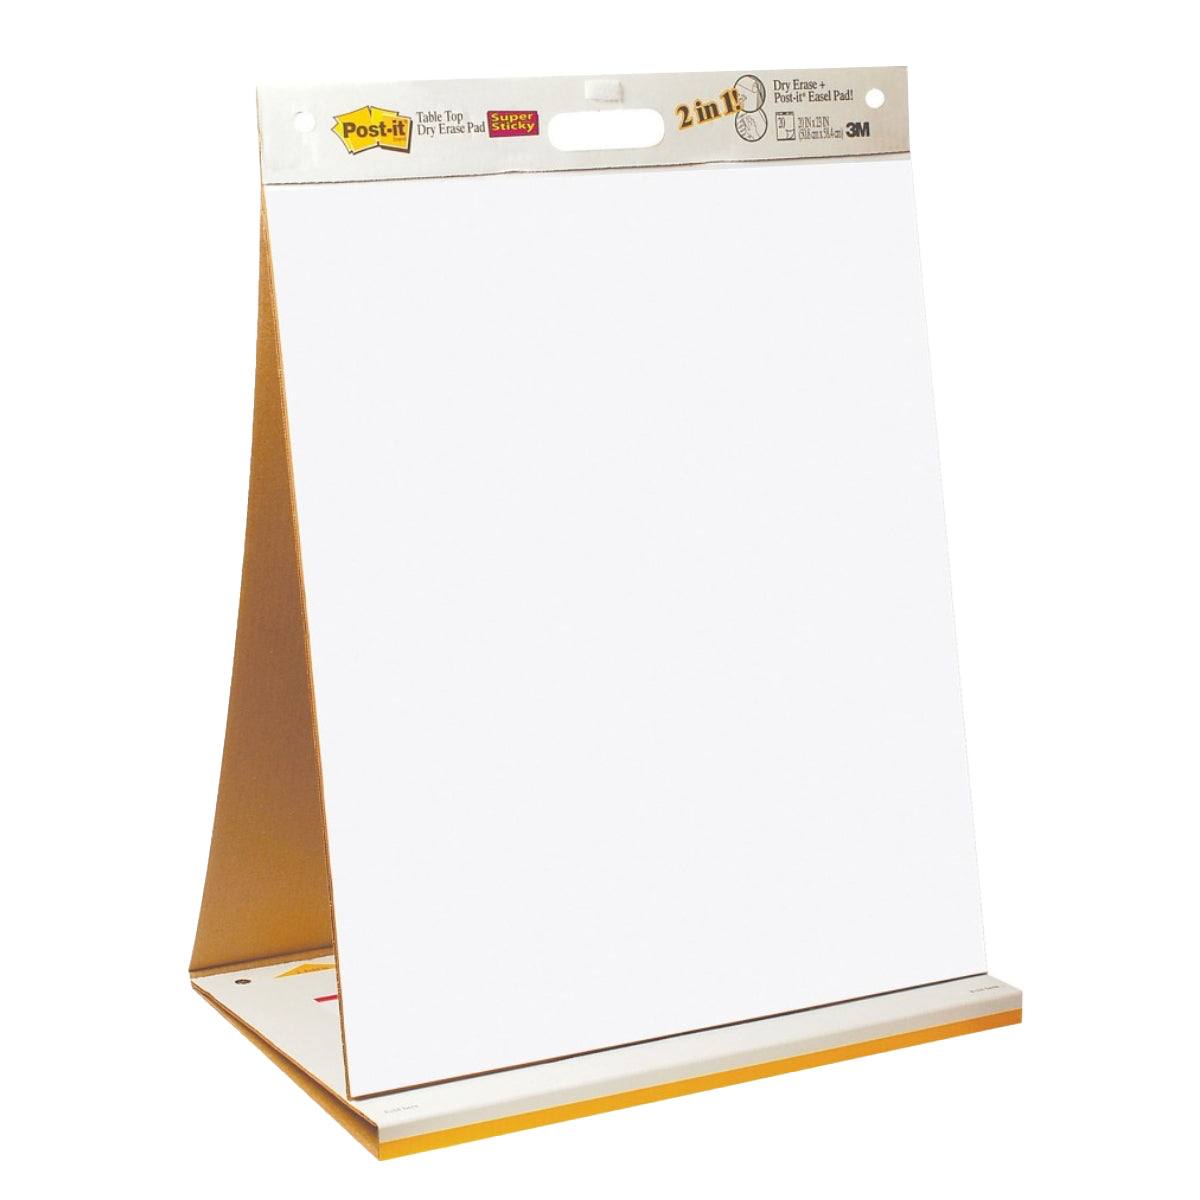 3M Post-it Super Sticky Tabletop Easel Pad 563, 20 x 23 inches, plain, 20sheets/pad, White